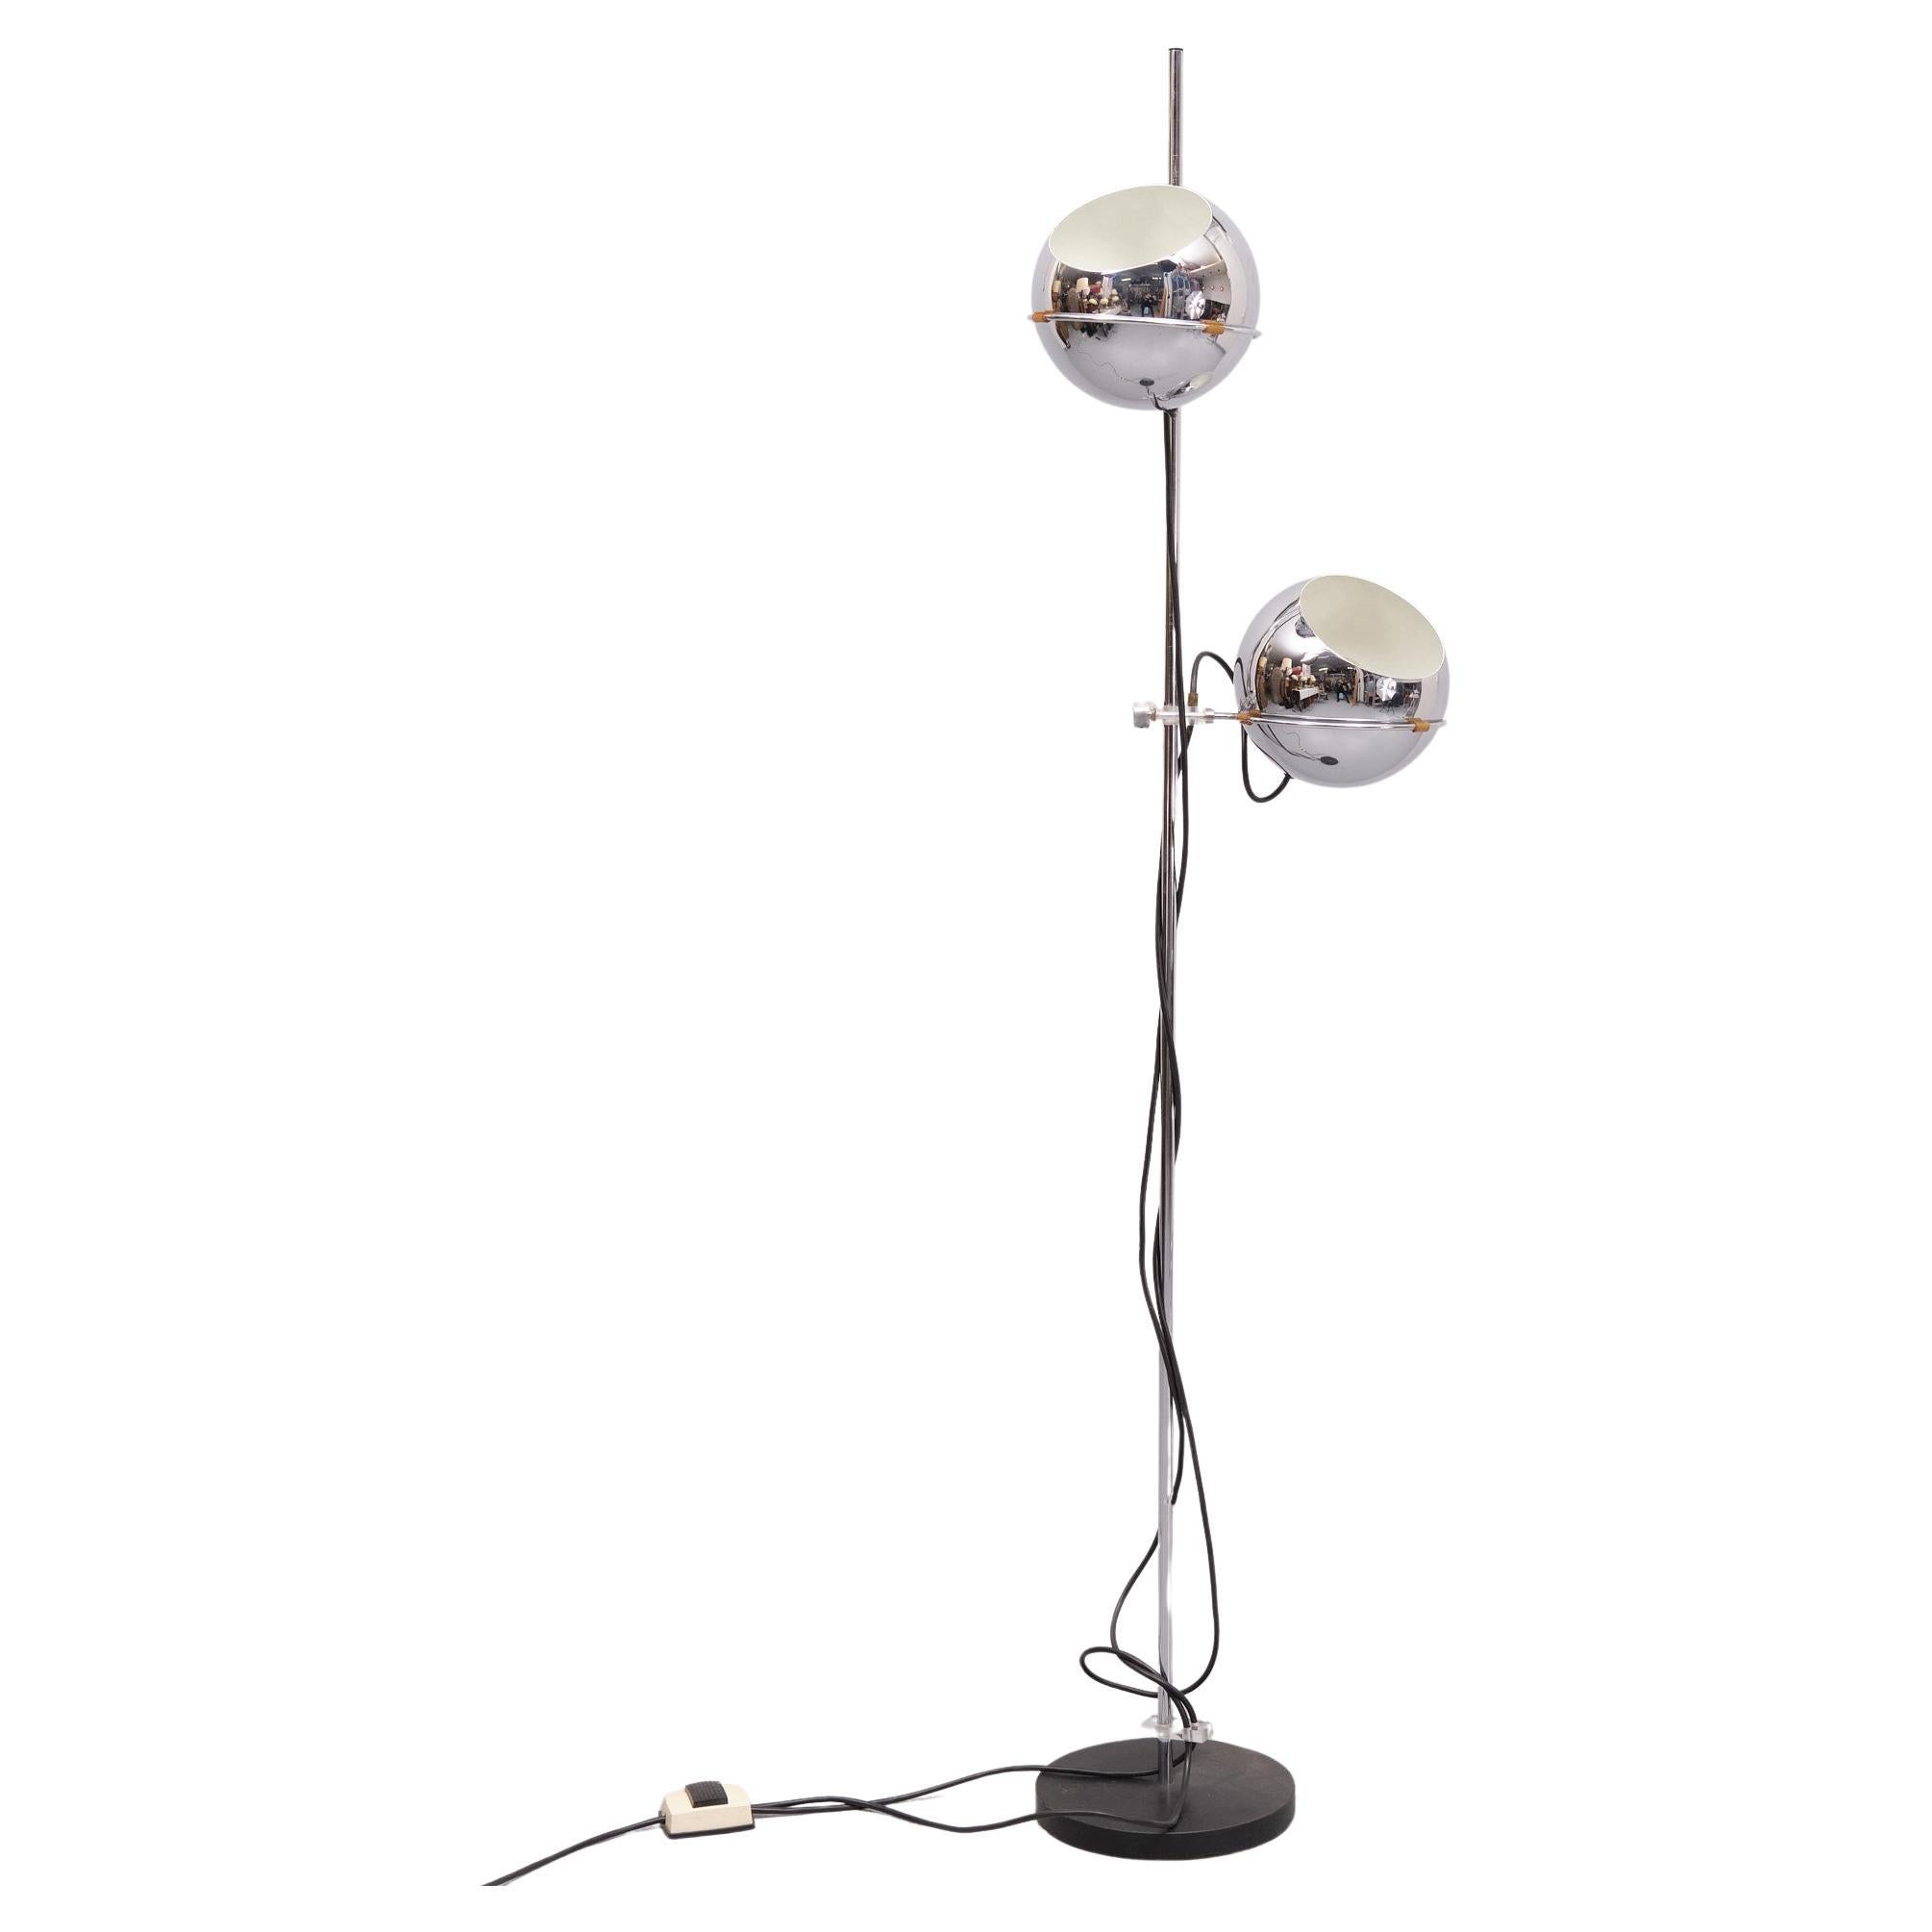 Gepo Floor Lamp Chrome; sixties floor lamp designed by the brothers Postuma for the Dutch company Gepo. The ball-shaped caps are adjustable in height and can be turned up or down for direct or indirect lighting. Material: iron, chrome. This vintage